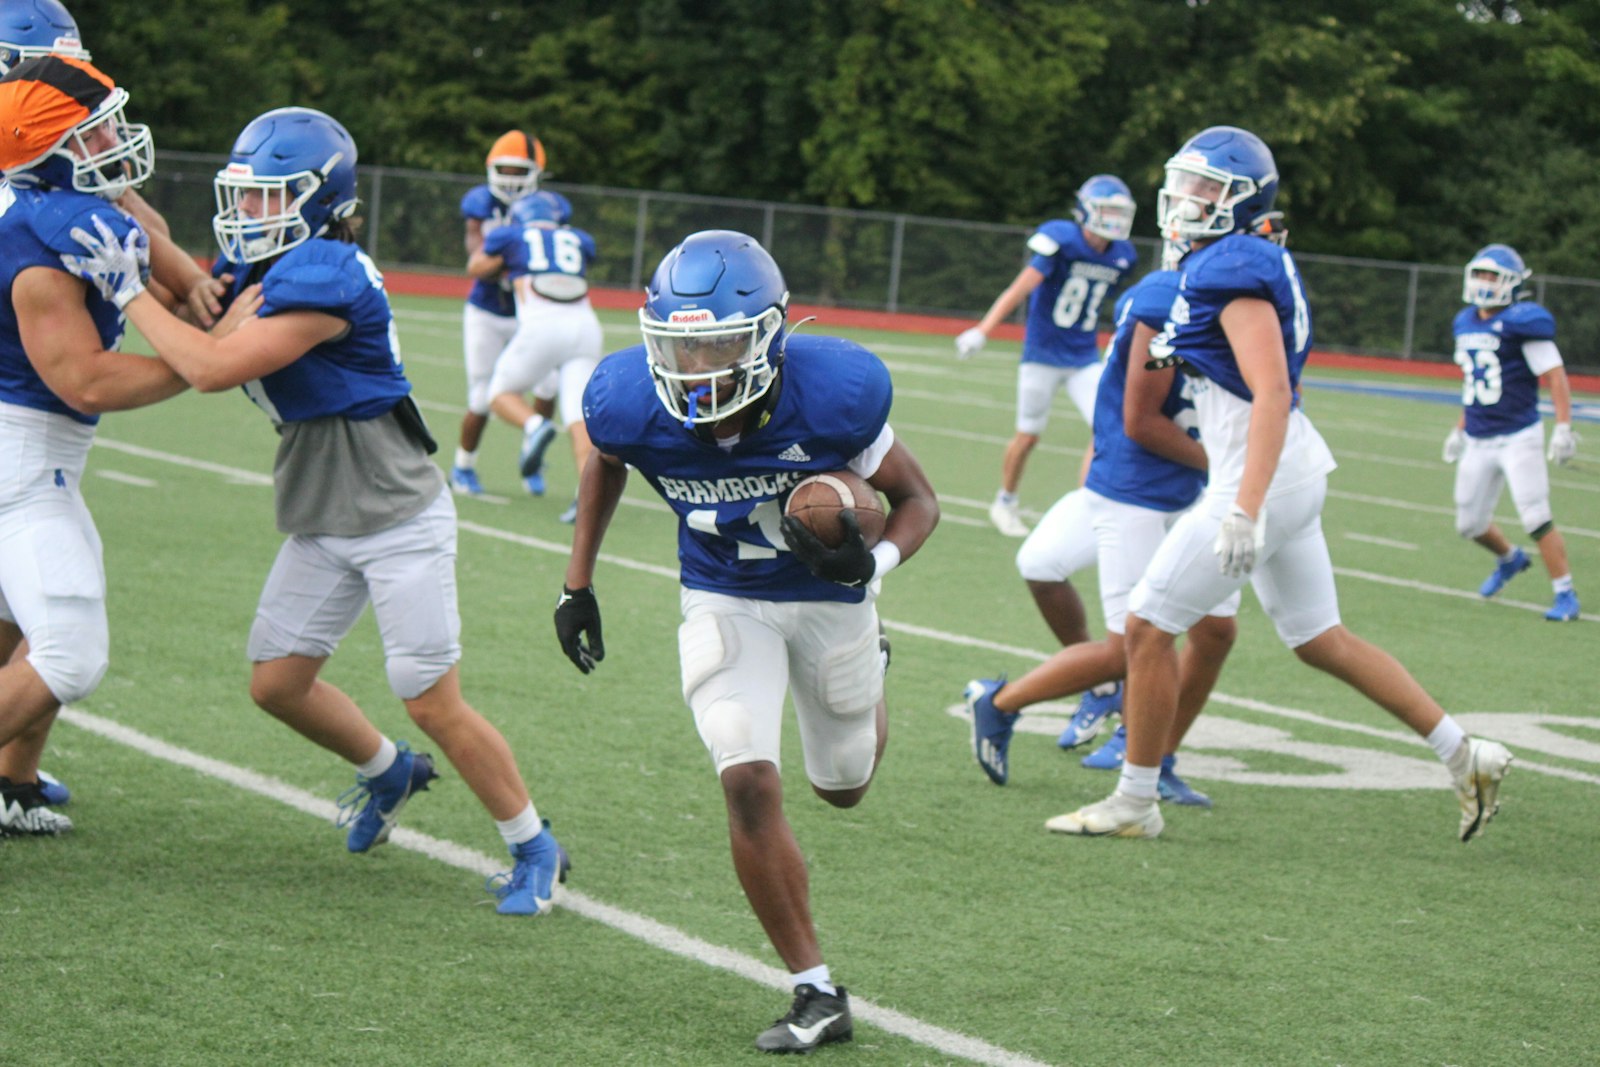 River Chaney returns a kickoff during a special teams run-through during Detroit Catholic Central’s Aug. 12 practice at the school.